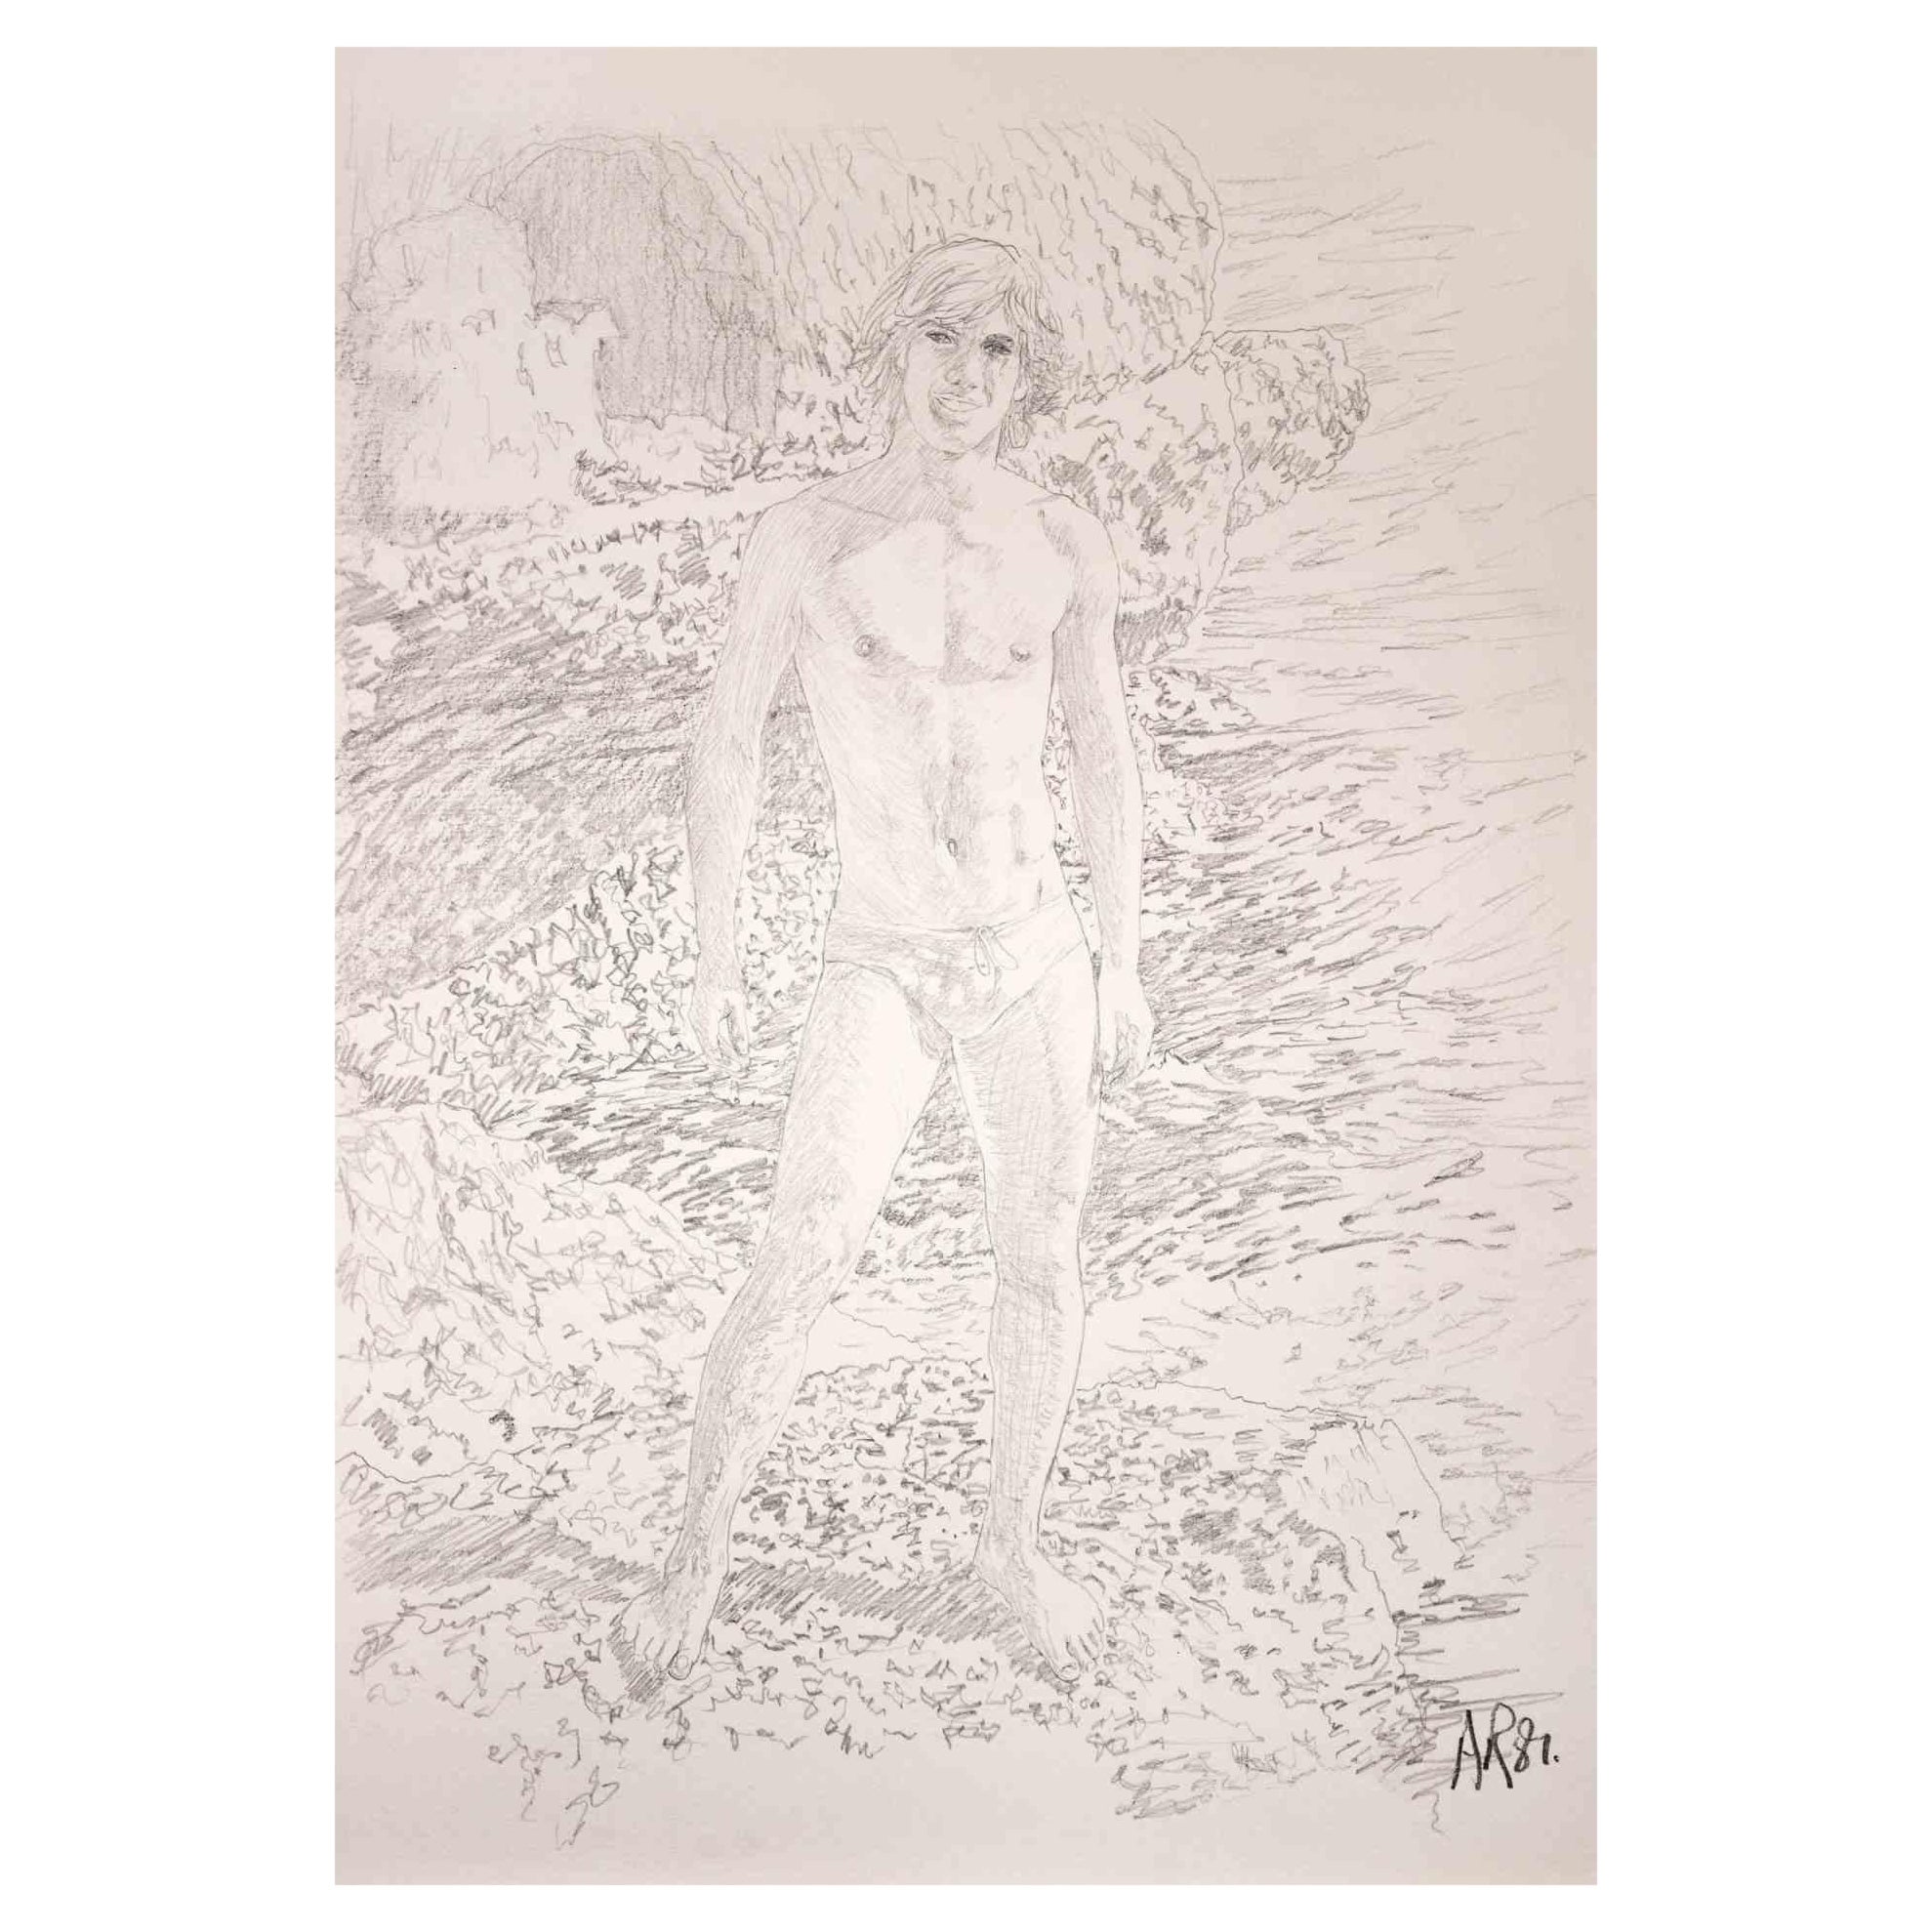 Boy on a Cliff -  Pencil Drawing by Anthony Roaland - 1981